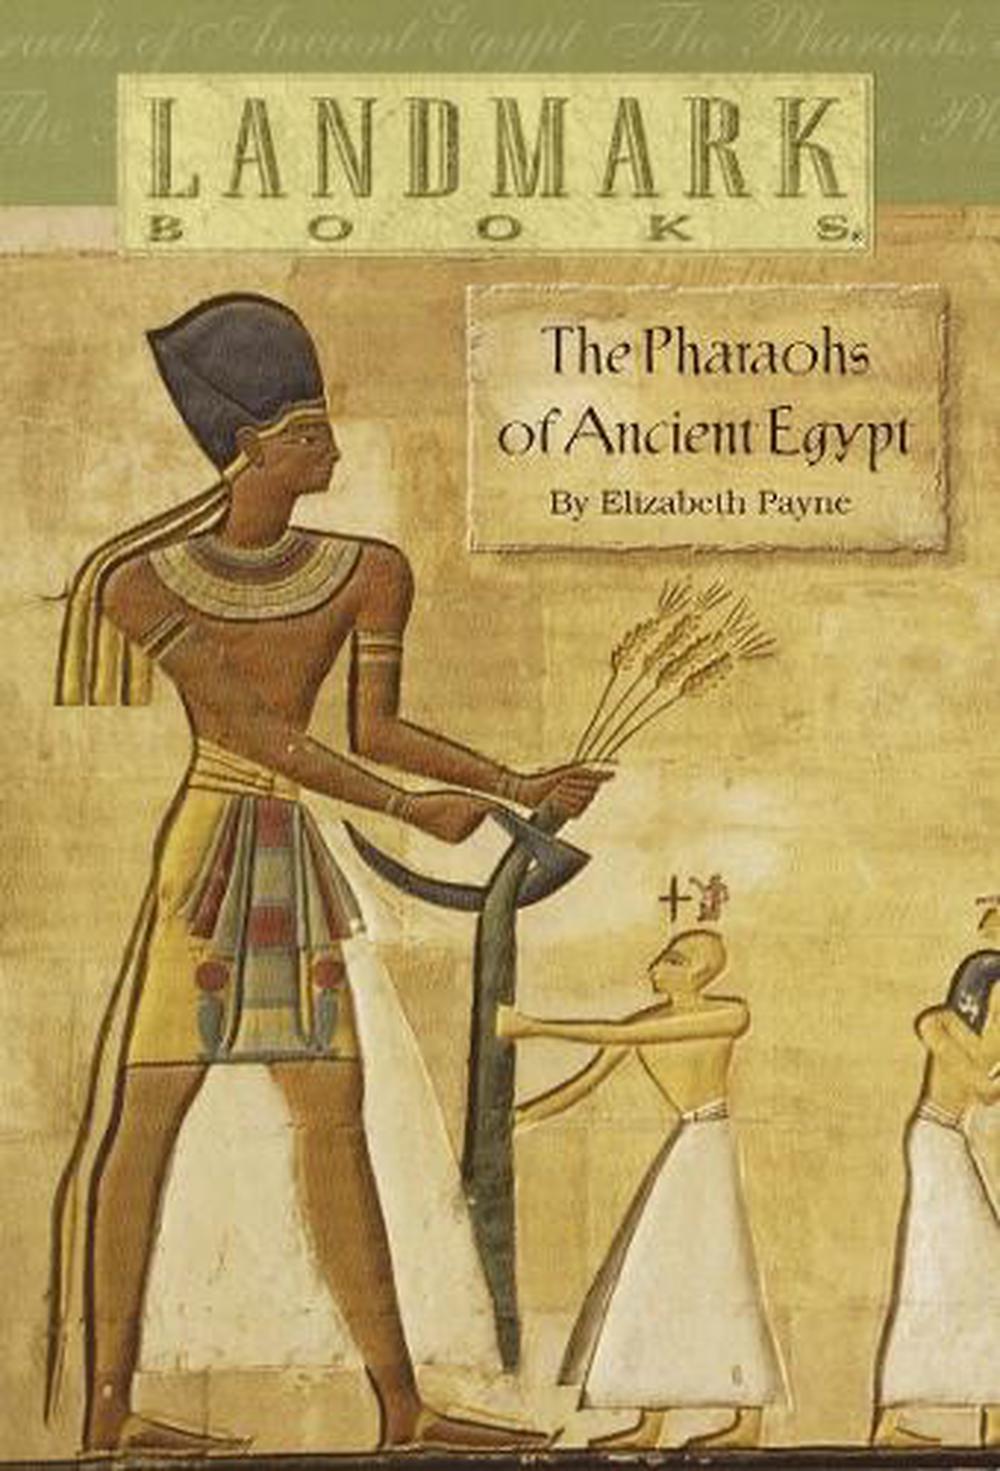 The Pharaohs of Ancient Egypt by Elizabeth Payne, Paperback, 9780394846996 Buy online at The Nile